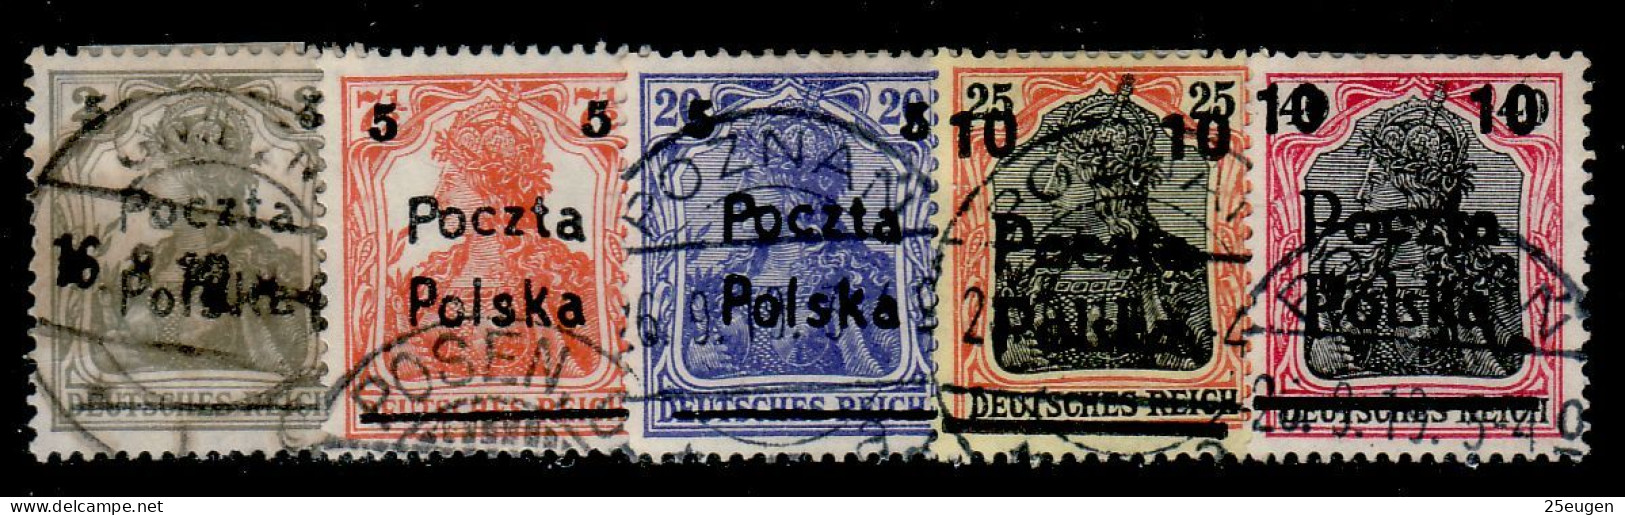 POLAND 1919 MICHEL NO: 130 - 134 USED - Used Stamps